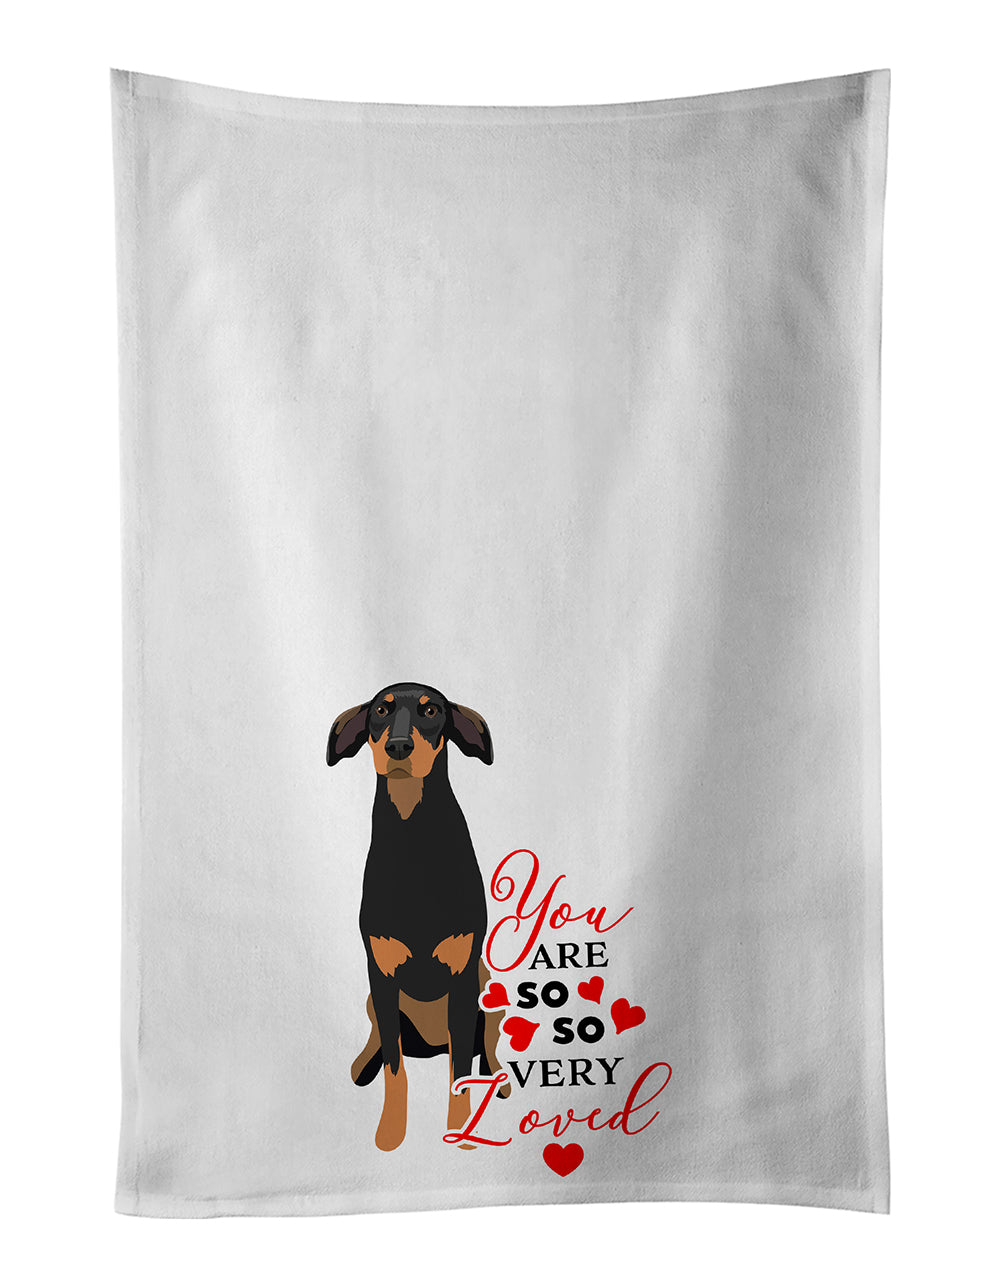 Buy this Doberman Pinscher Black and Rust Natural Ears #2 so Loved White Kitchen Towel Set of 2